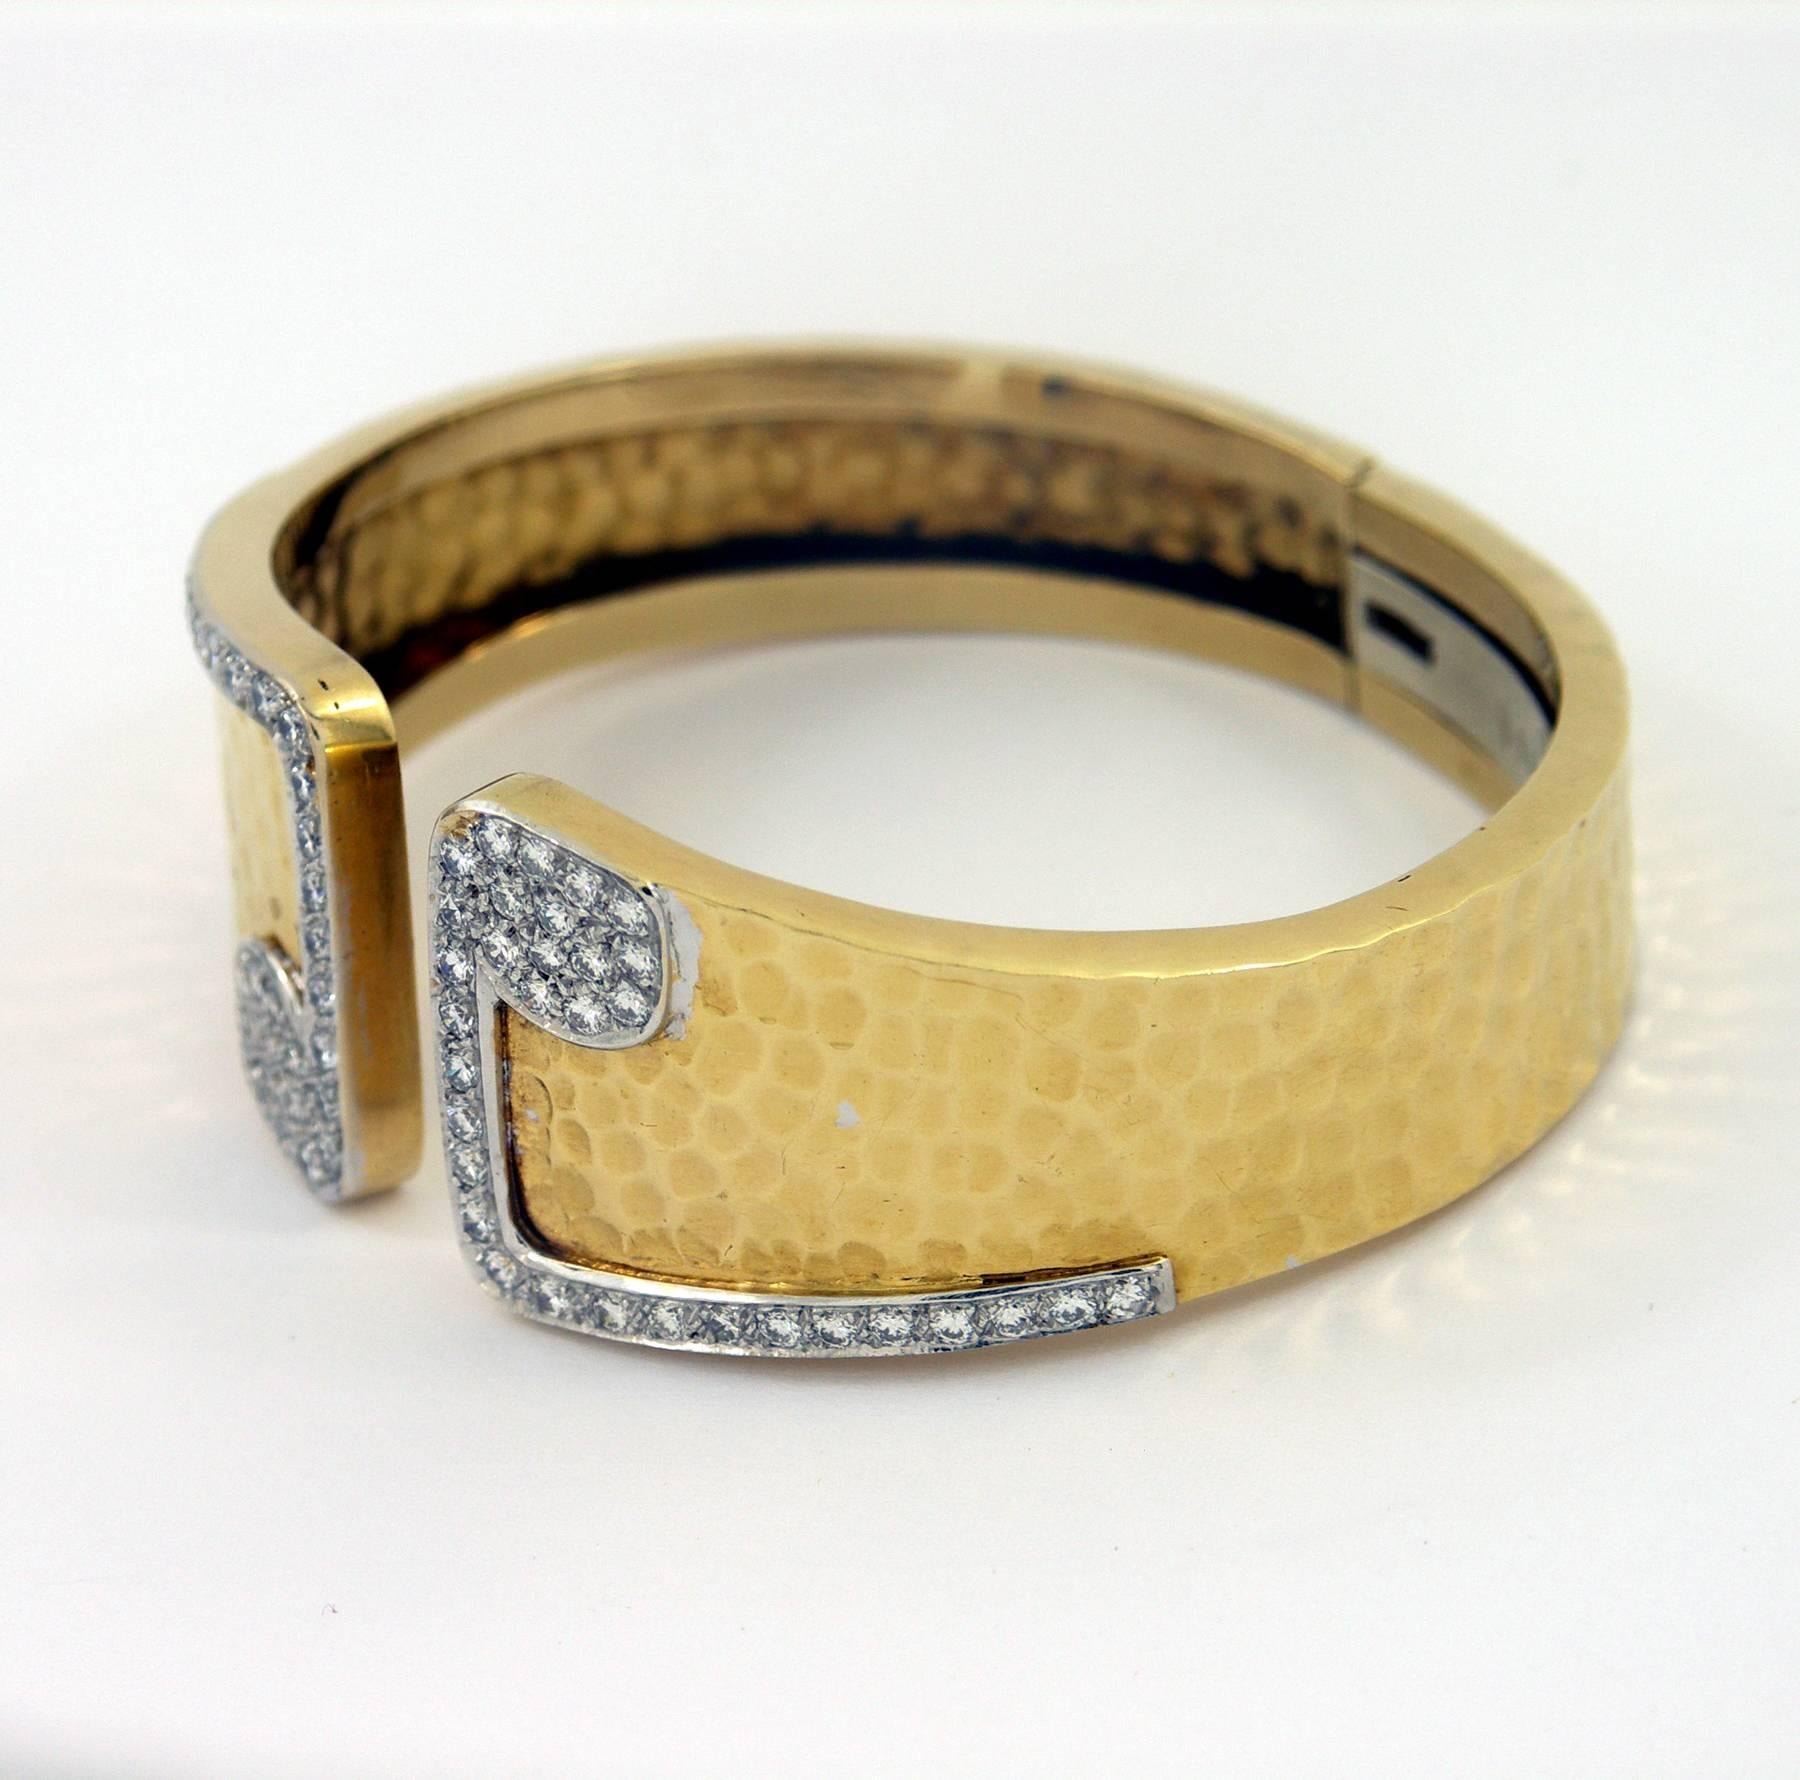 A ladies 18K yellow gold hammer finished bracelet measuring 1 inch at the opening and tapering down to 1/2 inch at the hinge. The split front features mirror imaged motifs, pave' set with a total of approximately 1ct, round brilliant cut diamonds.